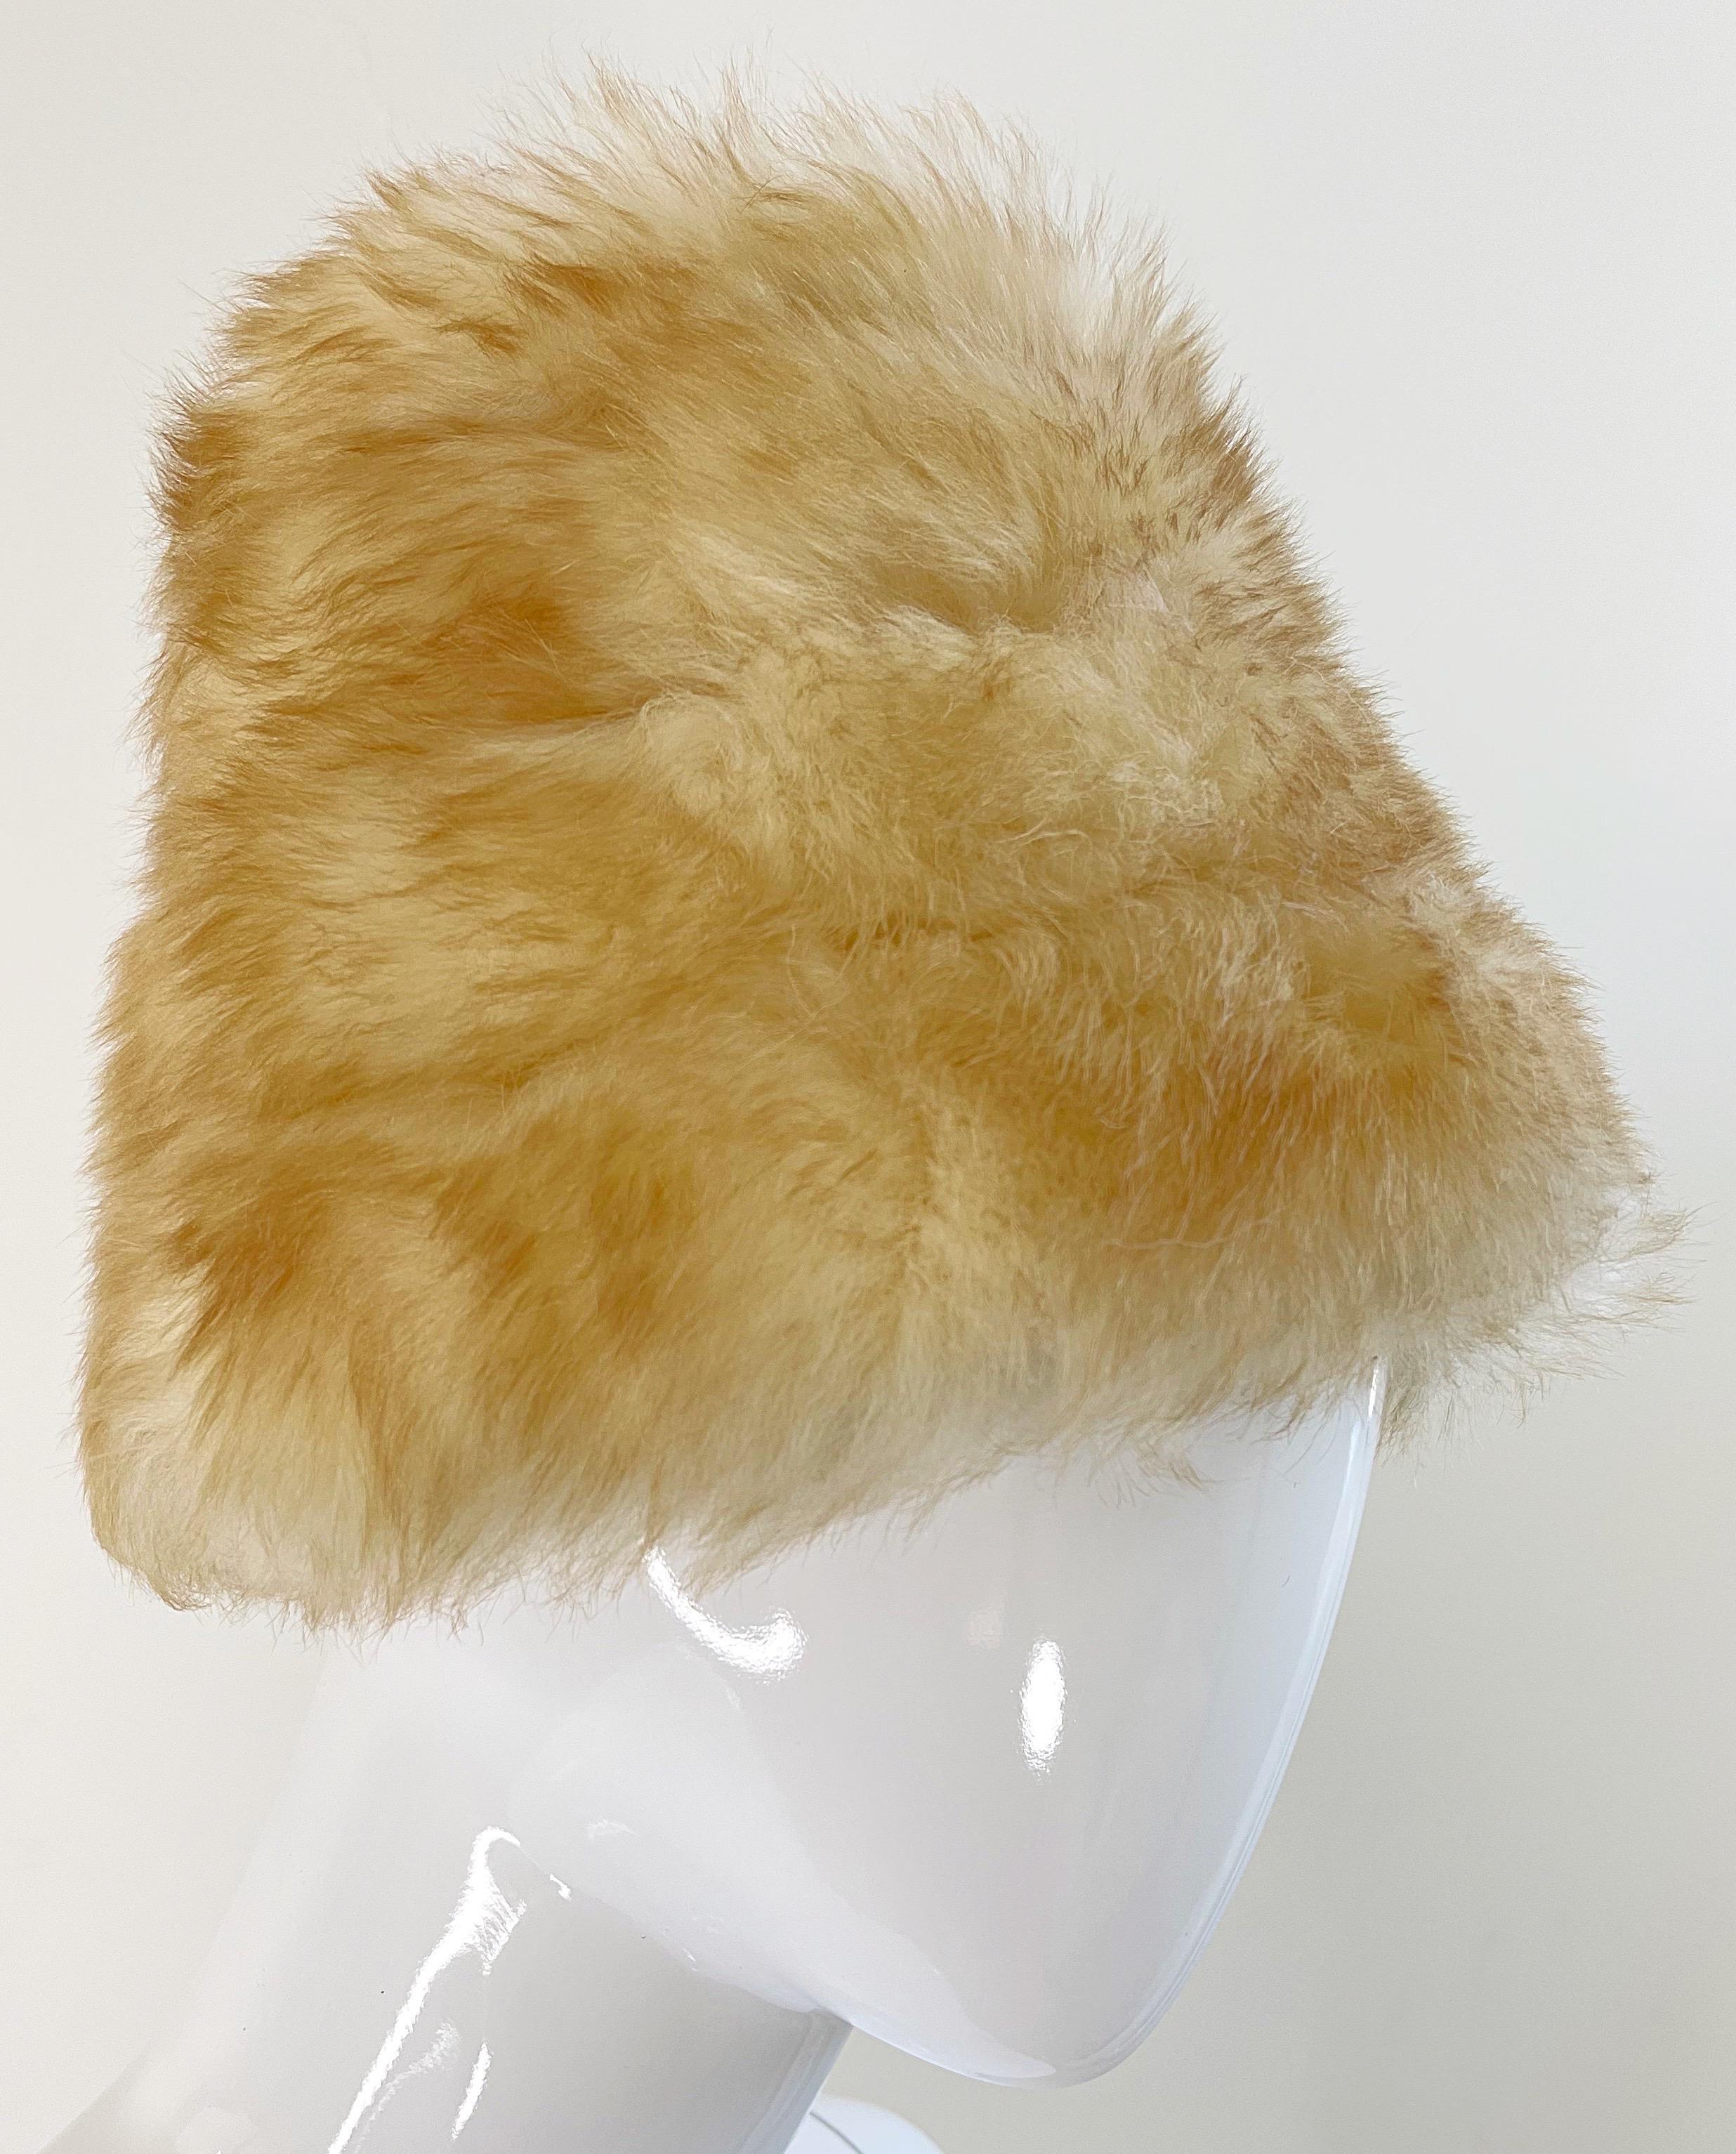 Yves Saint Laurent Fall 1976 Russian Collection Shearling Honey Tan Fur Hat 70s 3